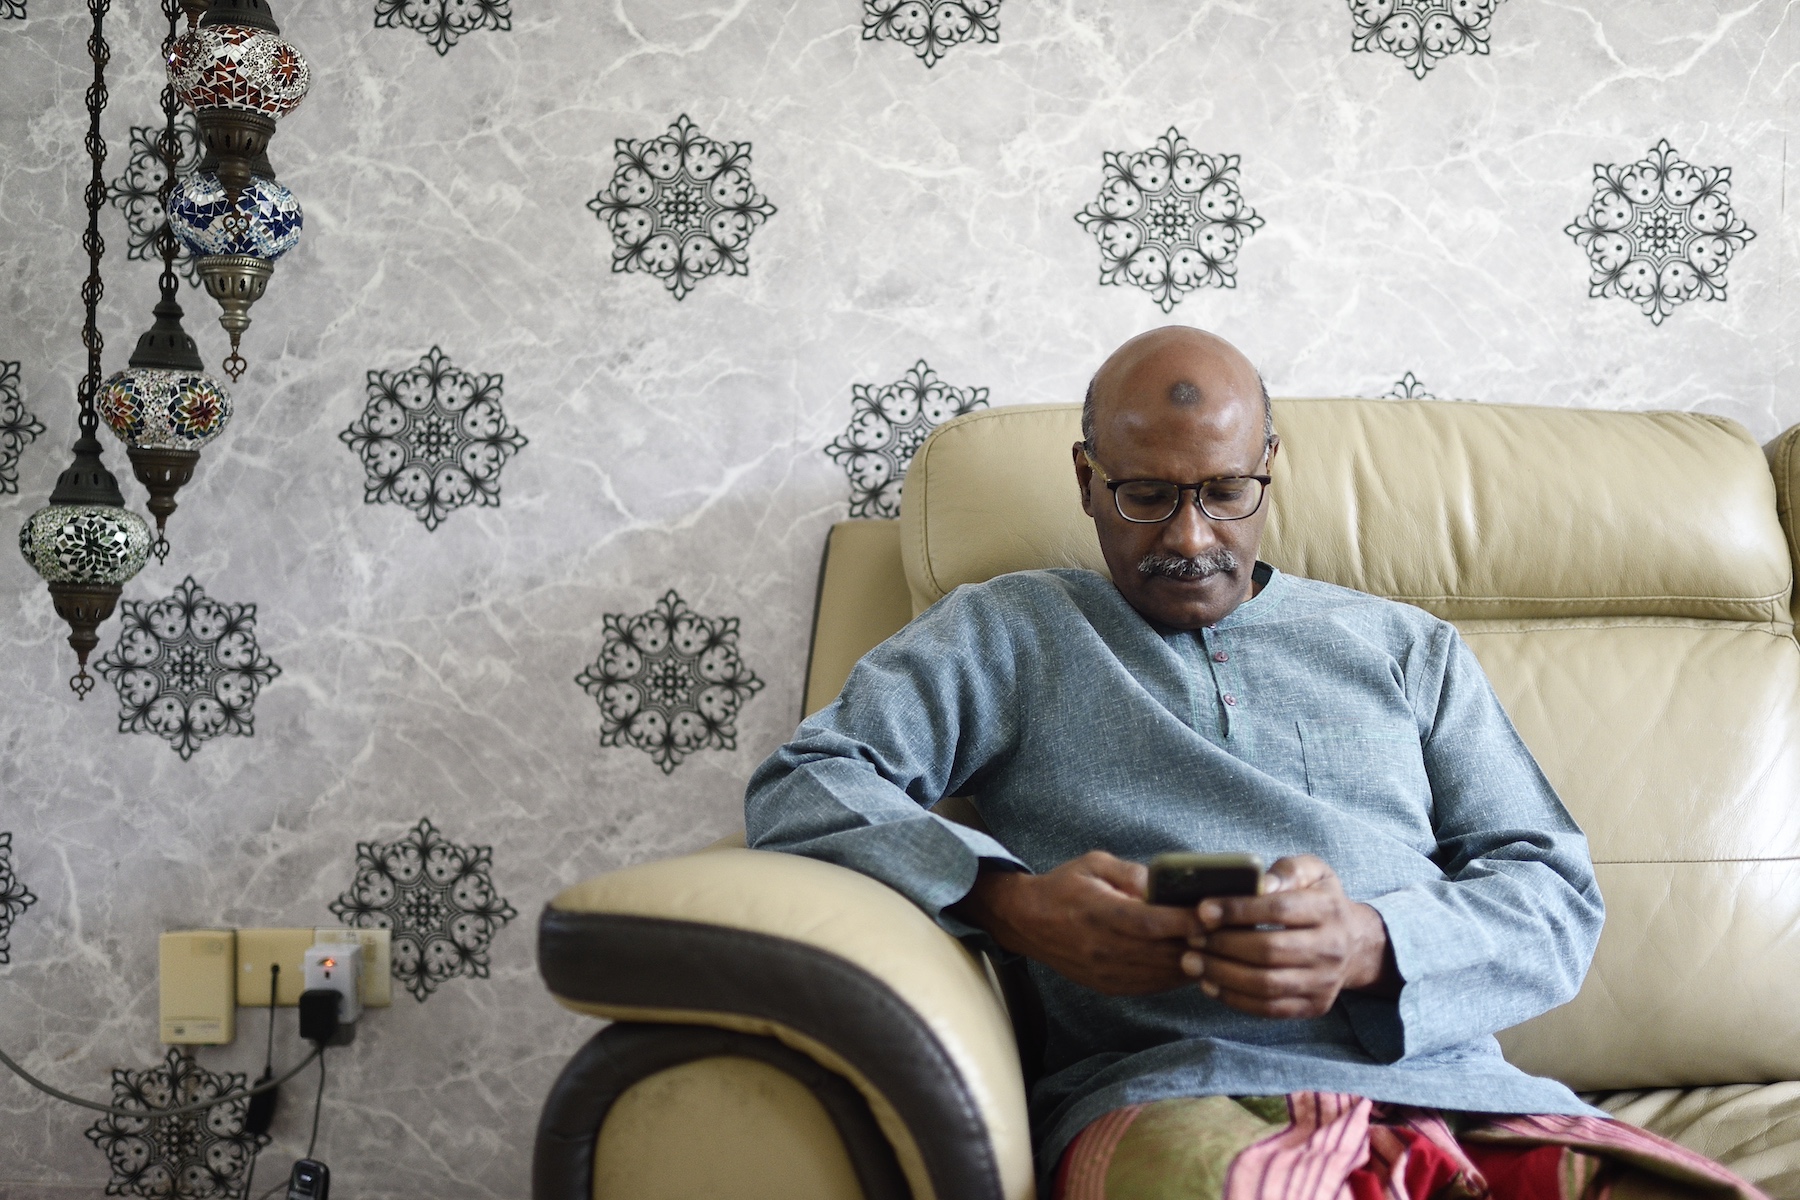 A man sits on the couch while typing something on his mobile phone